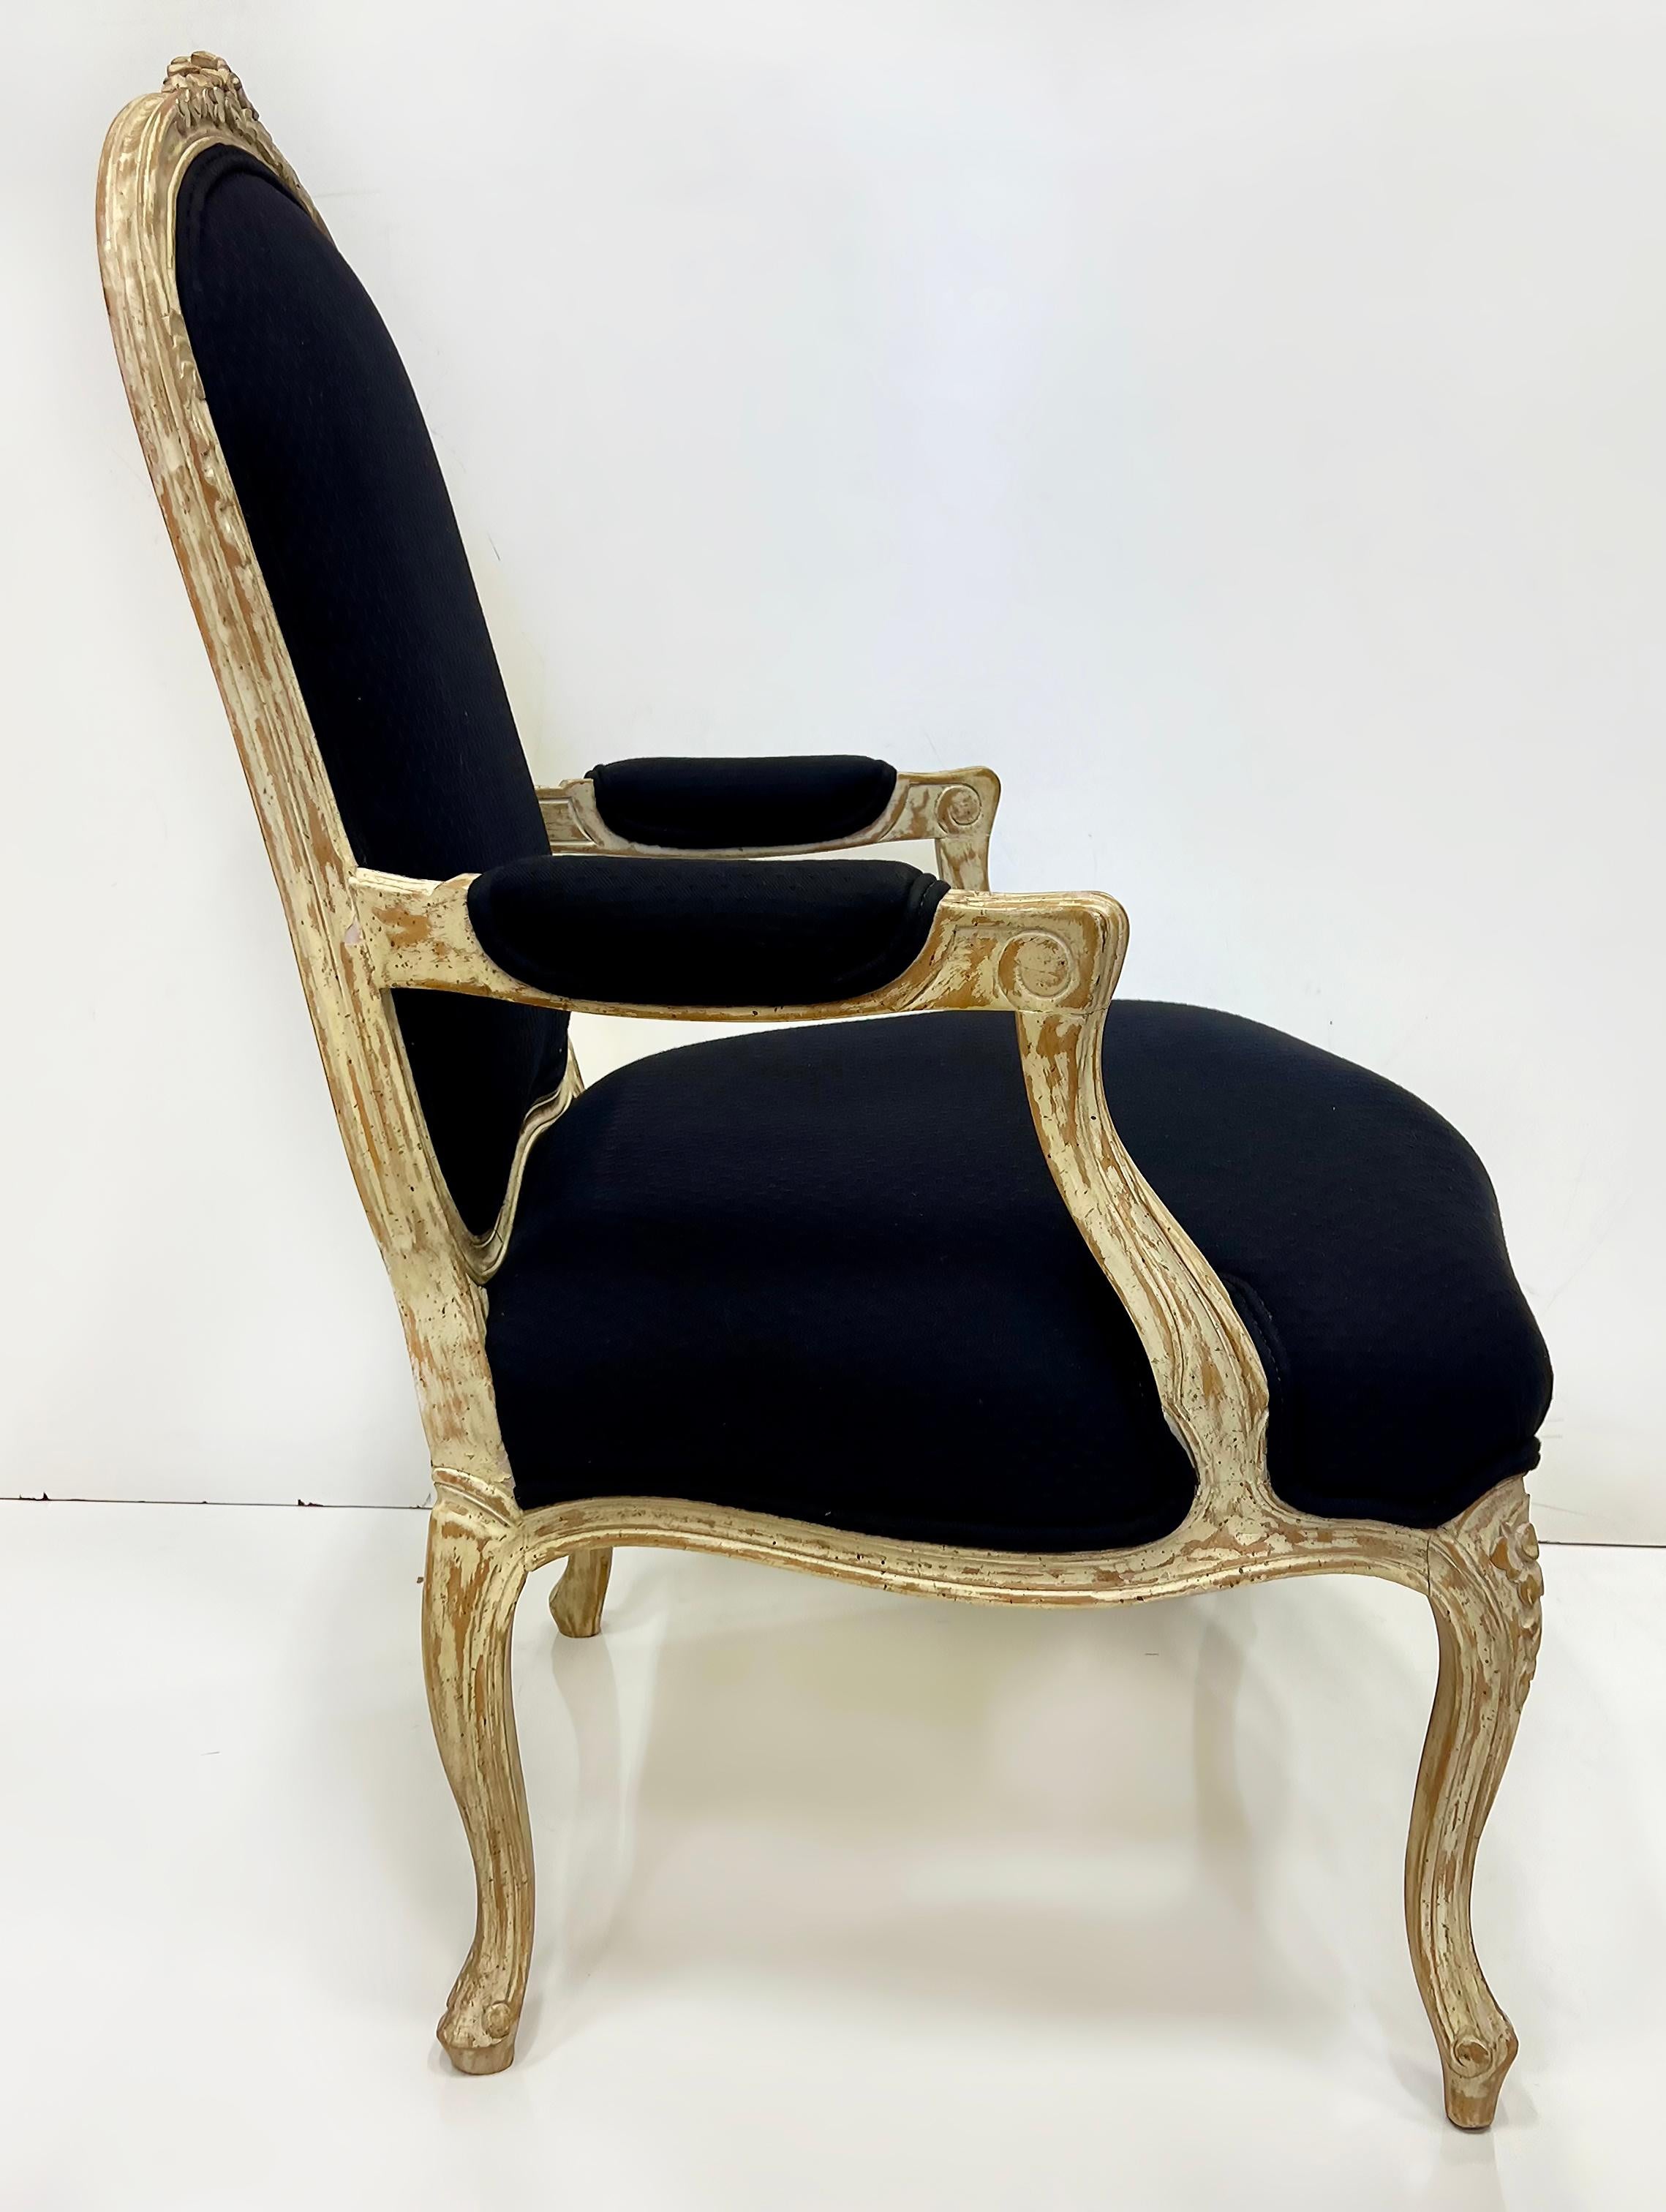 20th Century Substantial Vintage Louis XV Style Fauteuil Chairs, Large Scale Pair For Sale